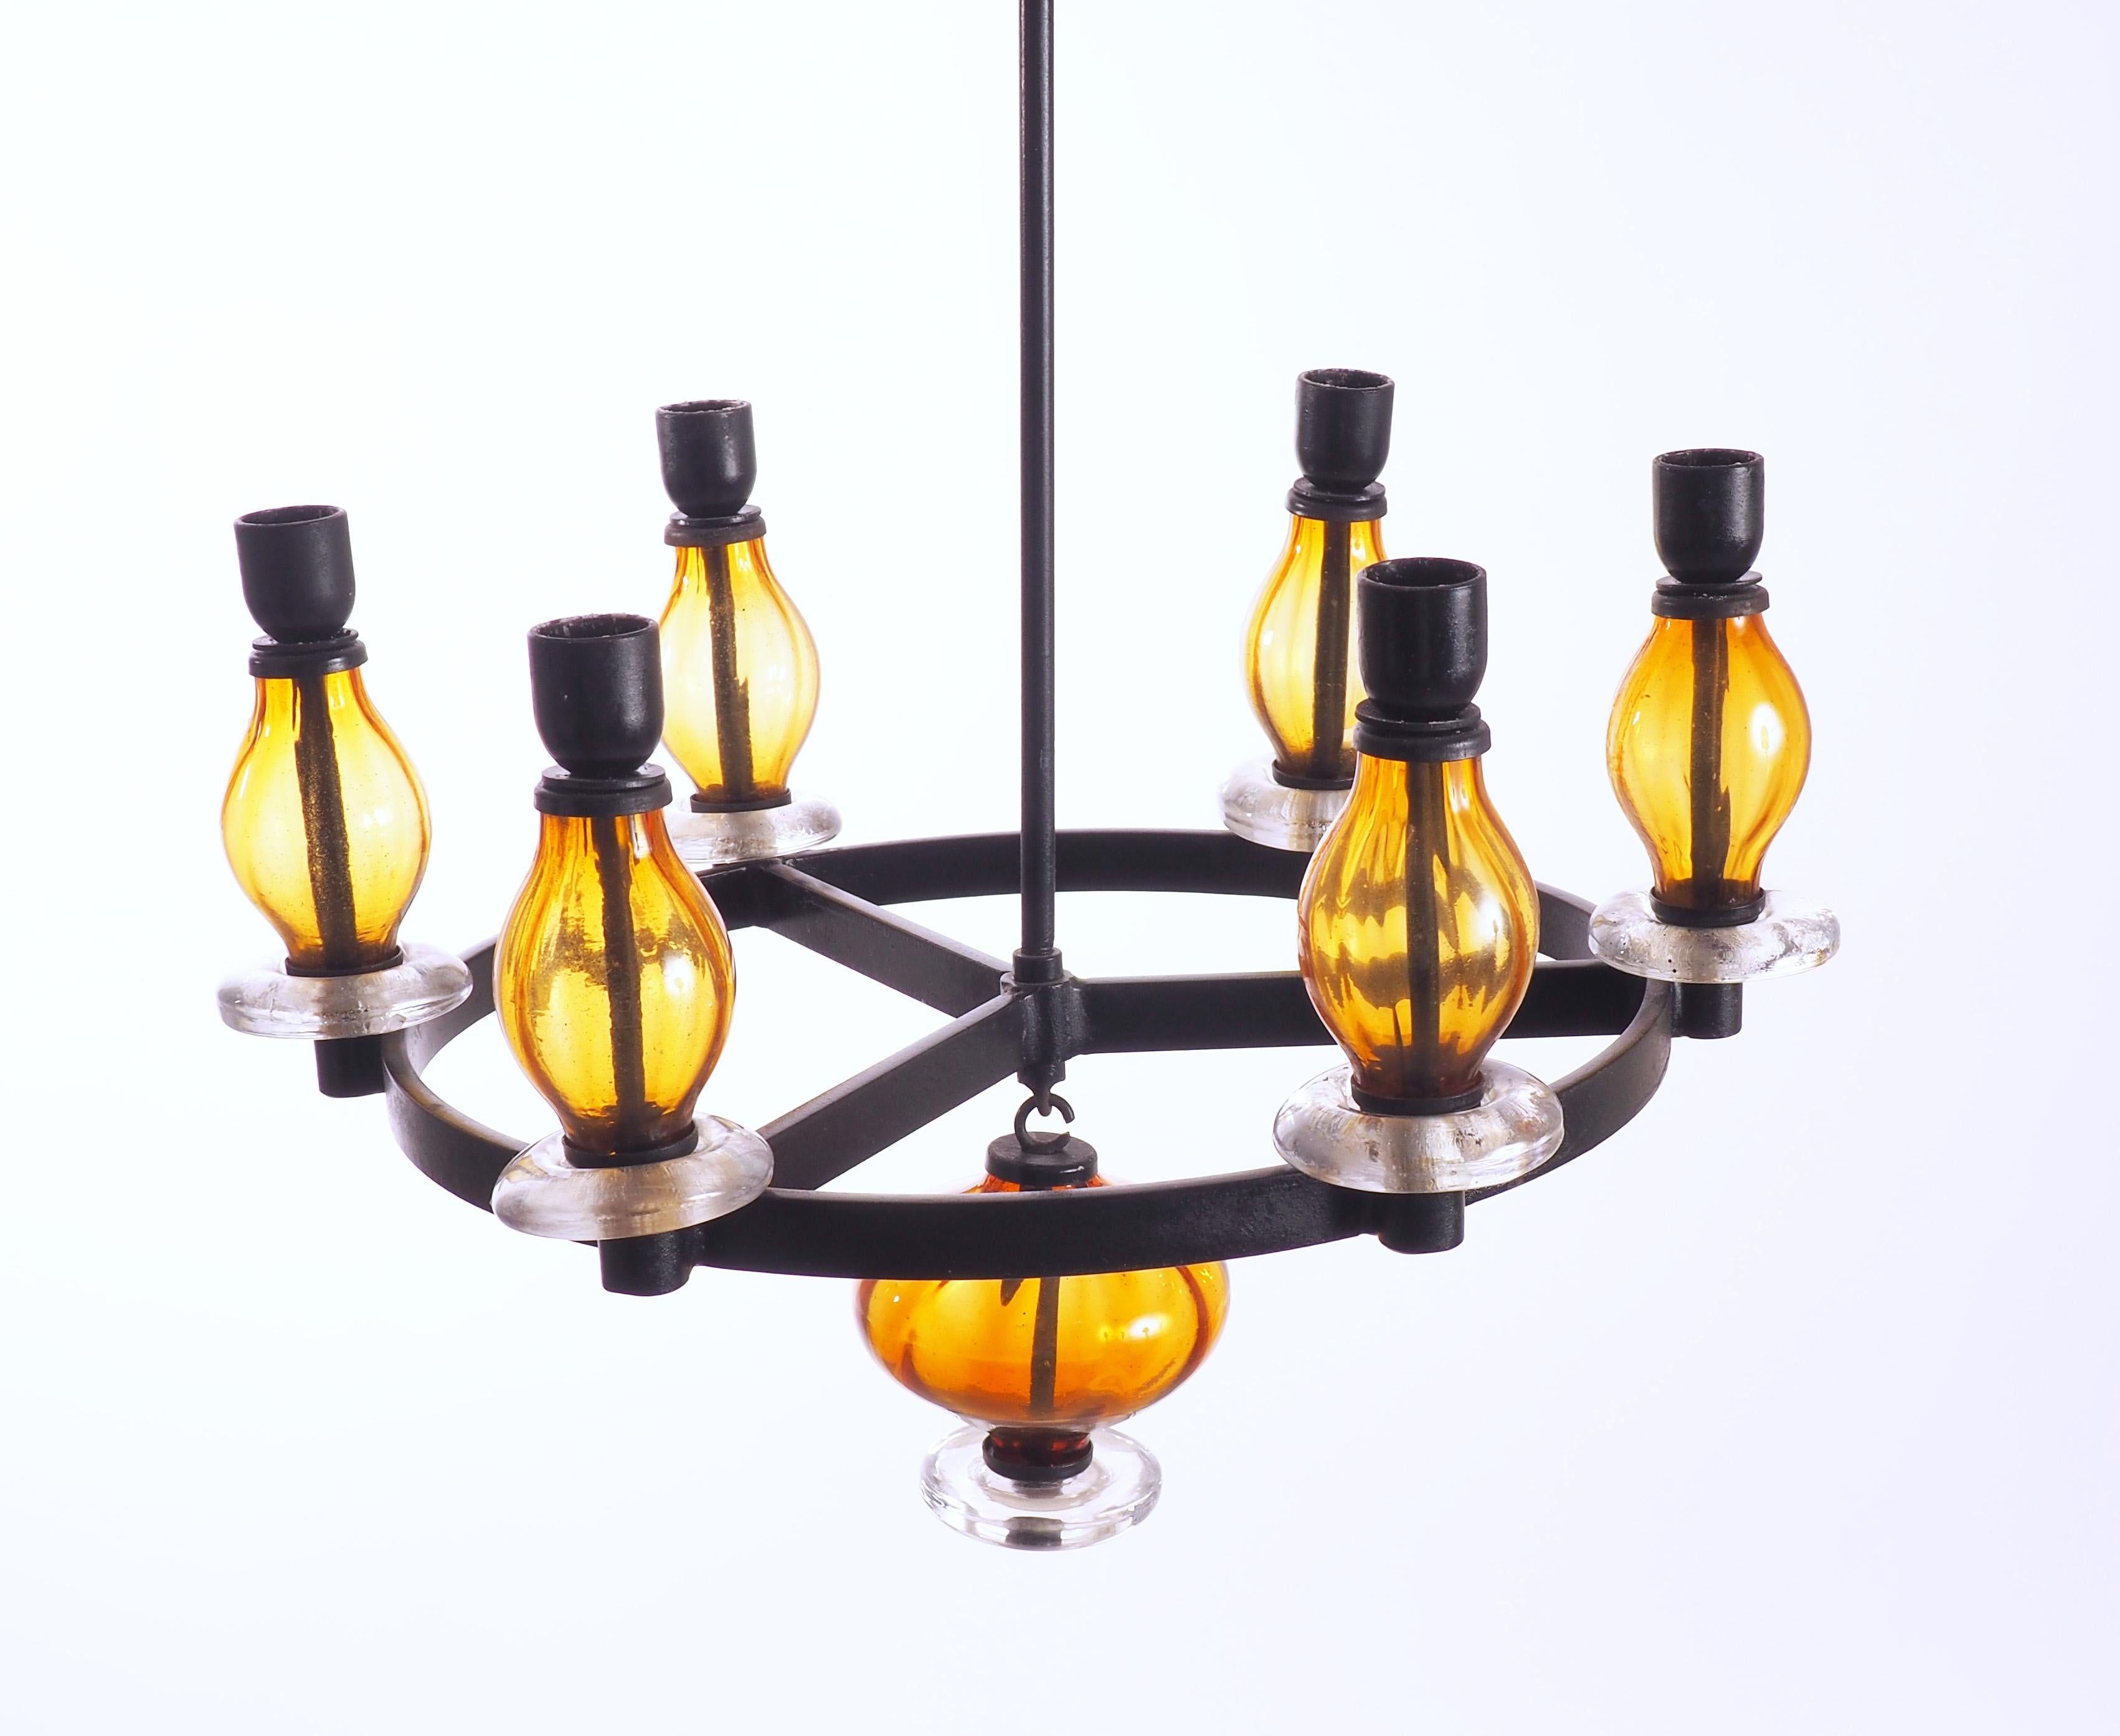 Chandelier by the Swedish glass artist Erik Höglund for Boda Glassworks in iron and amber colored glas. This chandelier holds six candles. Extra extensions are included.